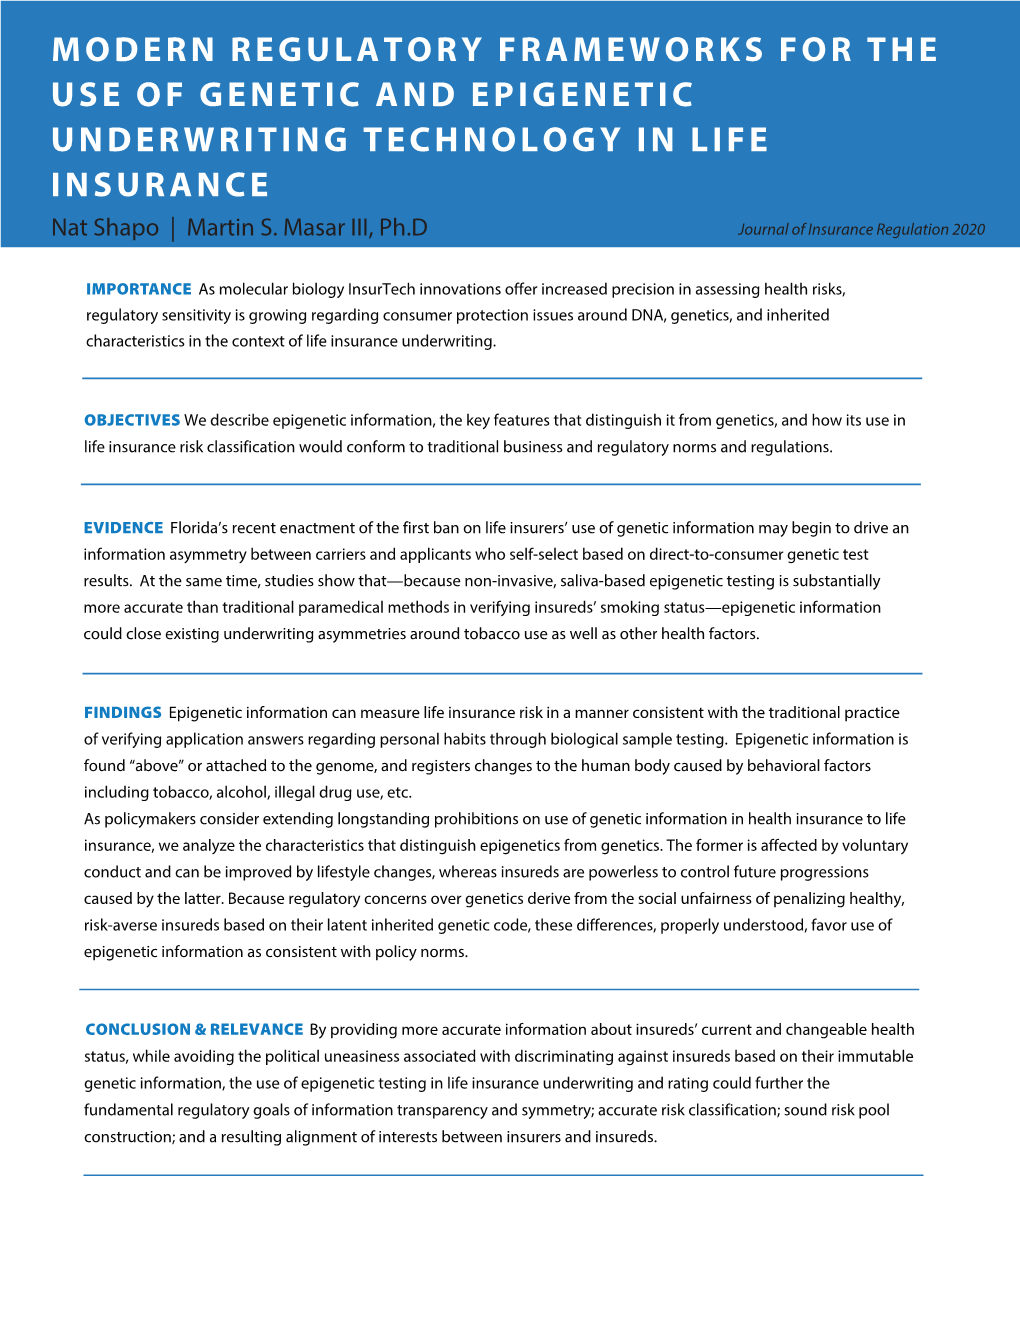 Journal of Insurance Regulation Modern Regulatory Frameworks for Theuse of Genetic and Epigenetic Underwriting Technology In